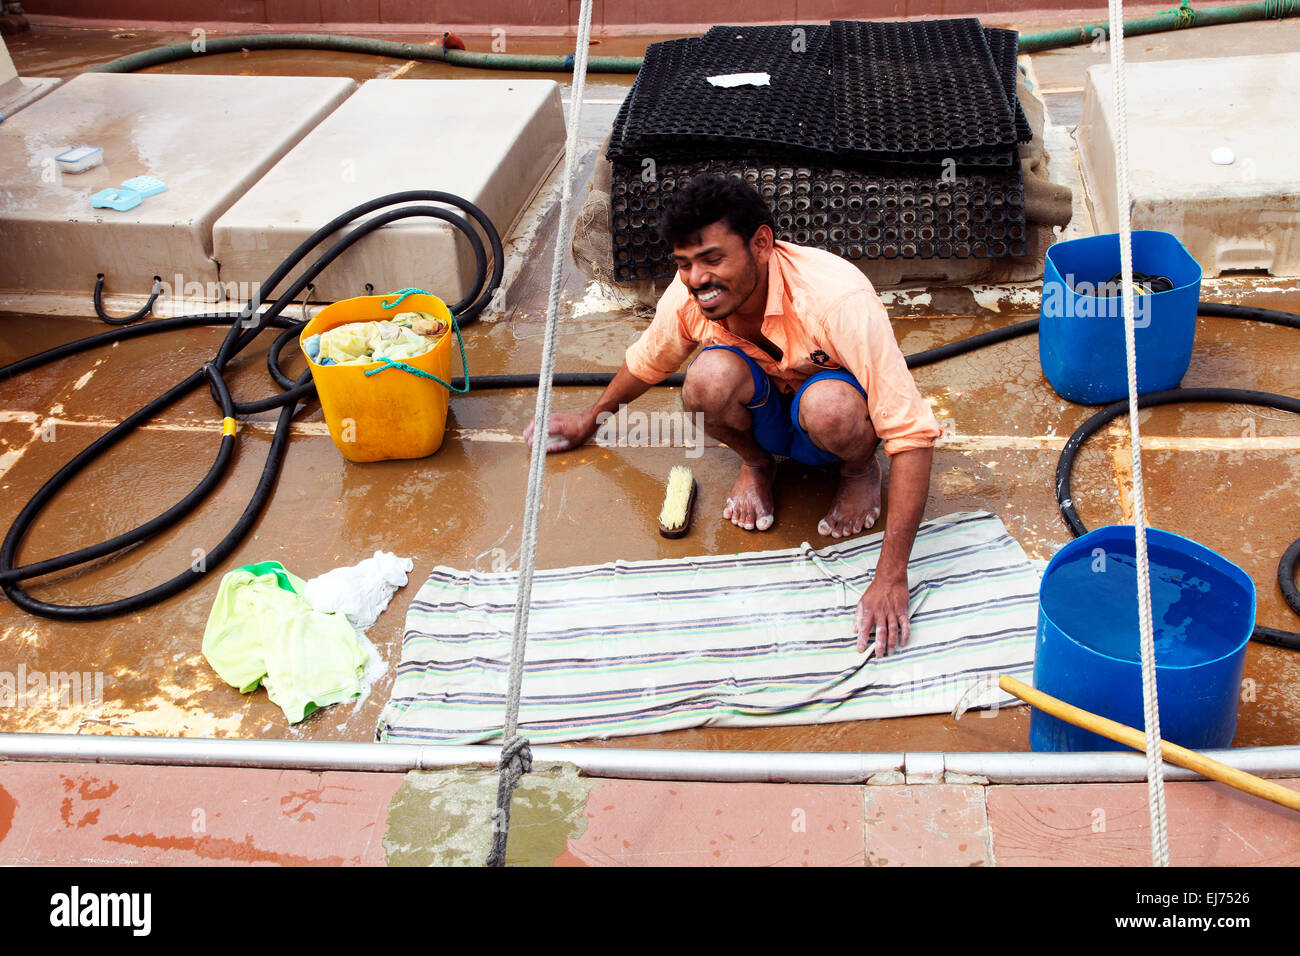 An Abu Dhabi fisherman does the laundry aboard his dhow. Stock Photo